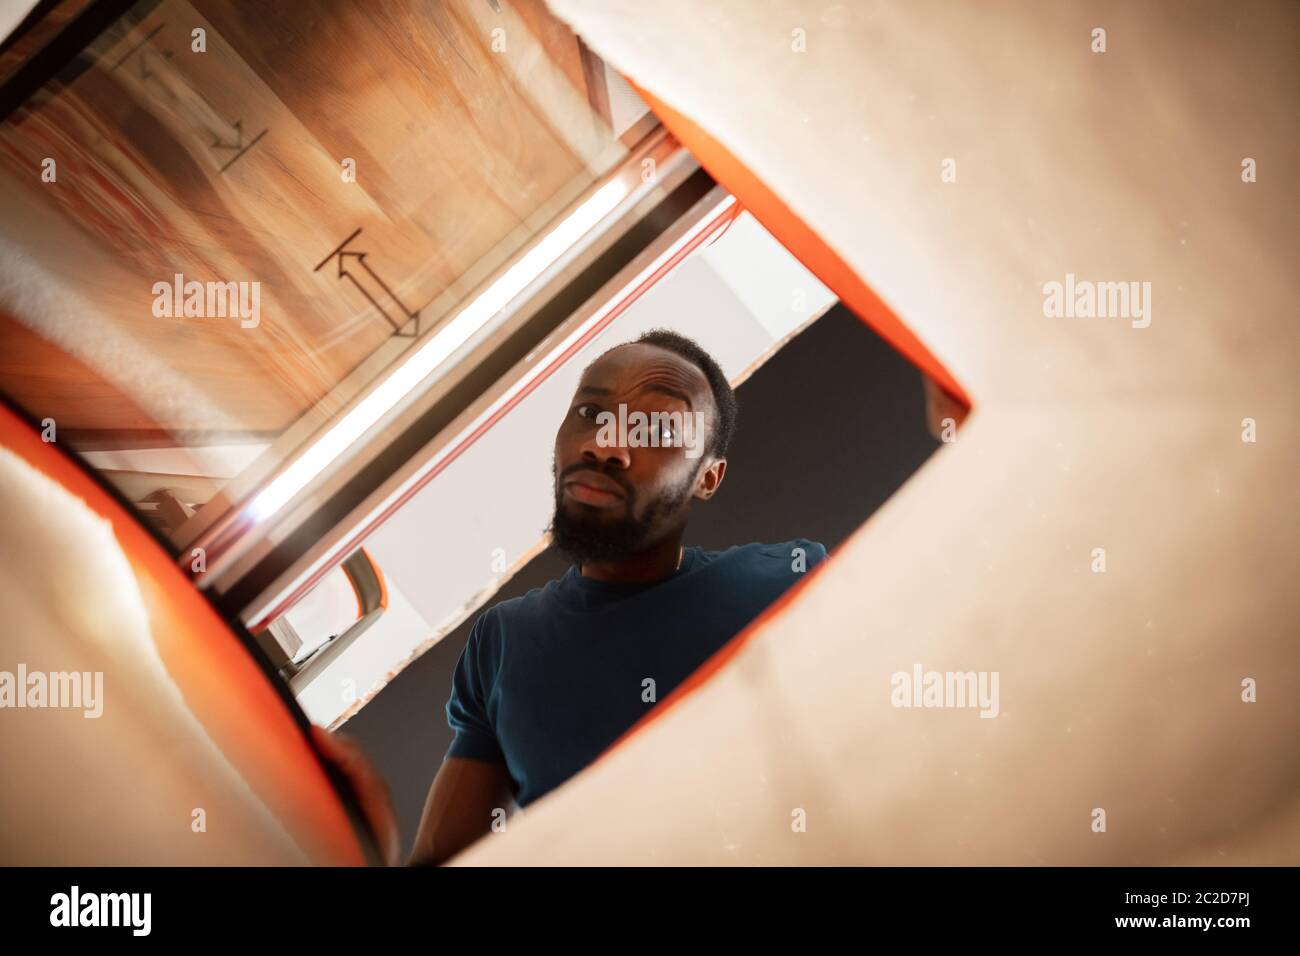 In old postal, delivery box. African-american man looking for job in unusual places at his home. Crazy, funny way to find career and going up. Concept of crisis, unemployment, finance, business. Stock Photo